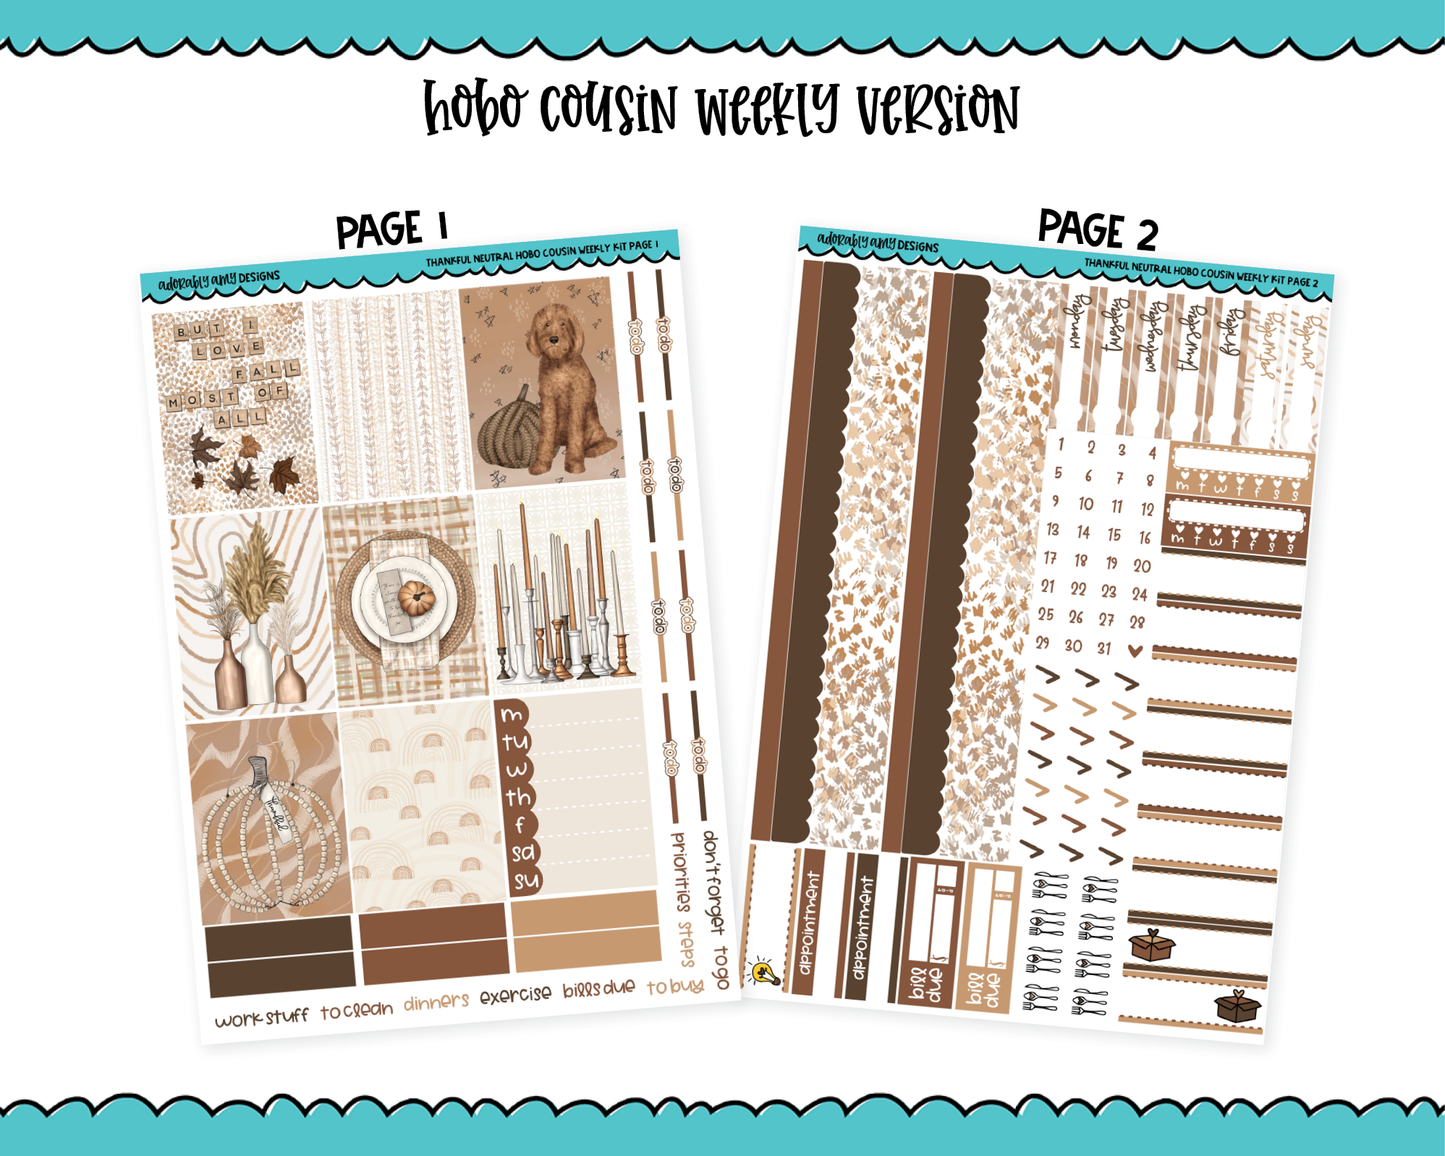 Hobonichi Cousin Weekly Thankful Neutral Thanksgiving Themed Planner Sticker Kit for Hobo Cousin or Similar Planners